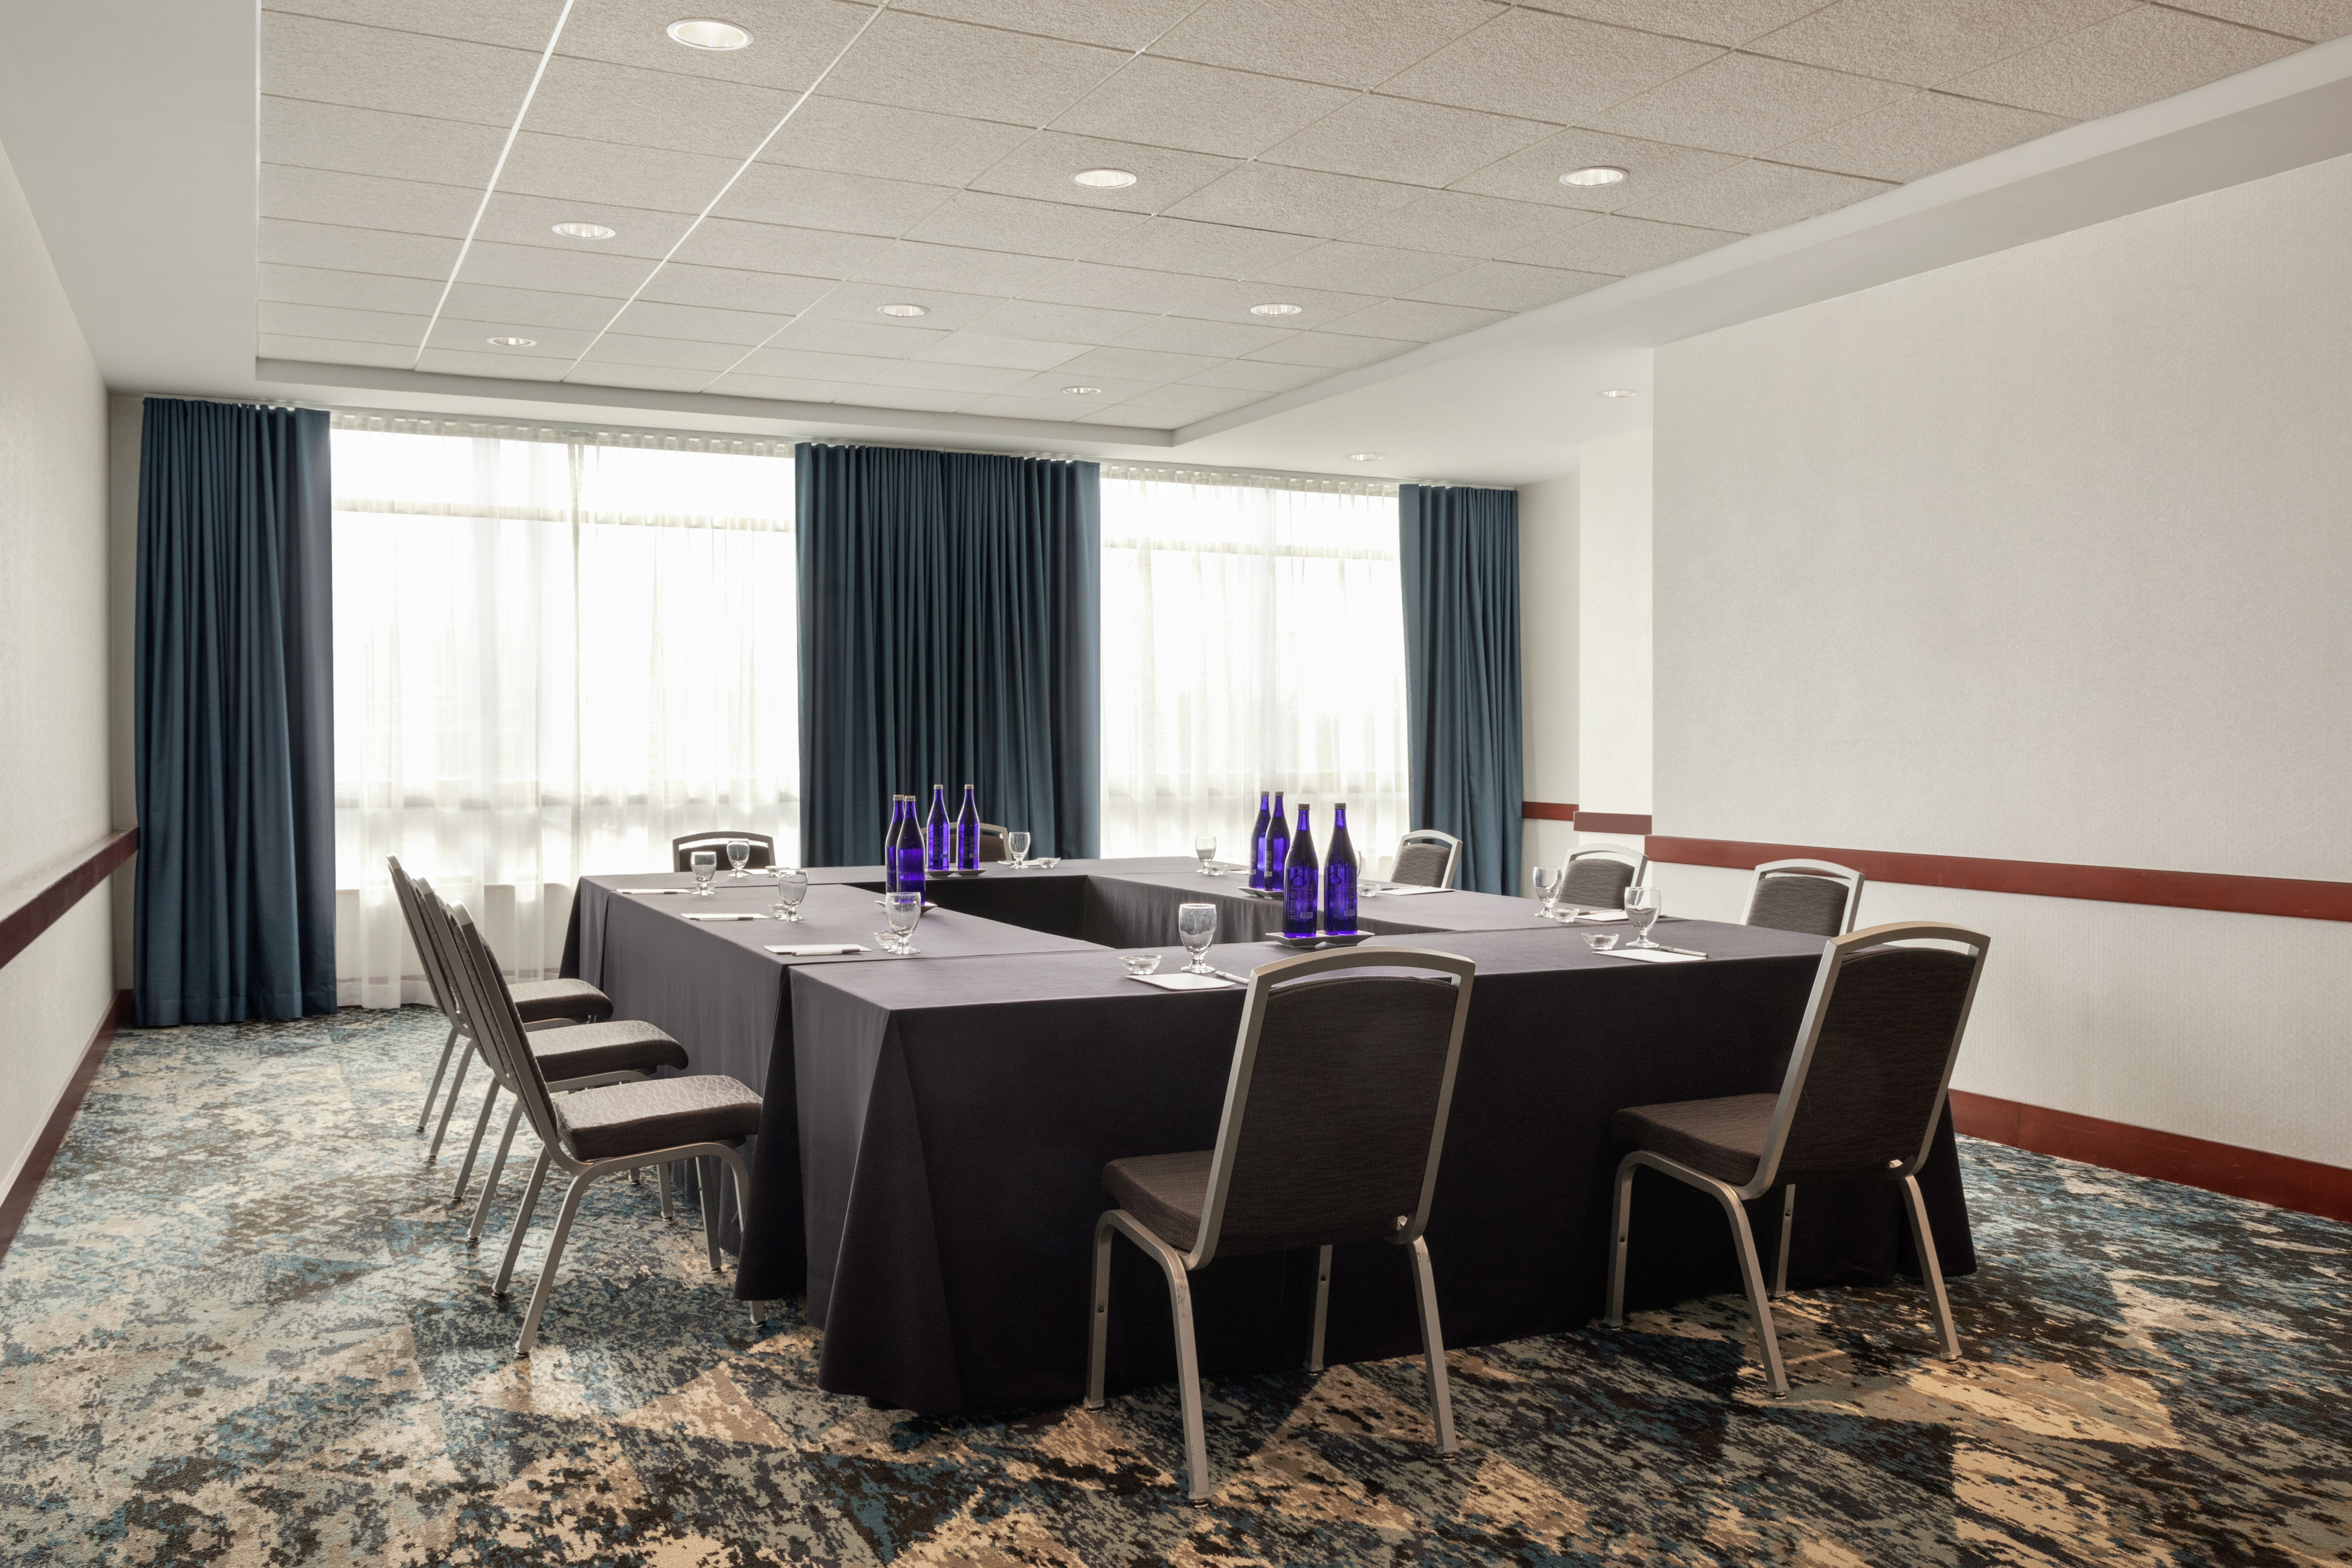 Bright hotel meeting room featuring large windows and hollow square table setup.